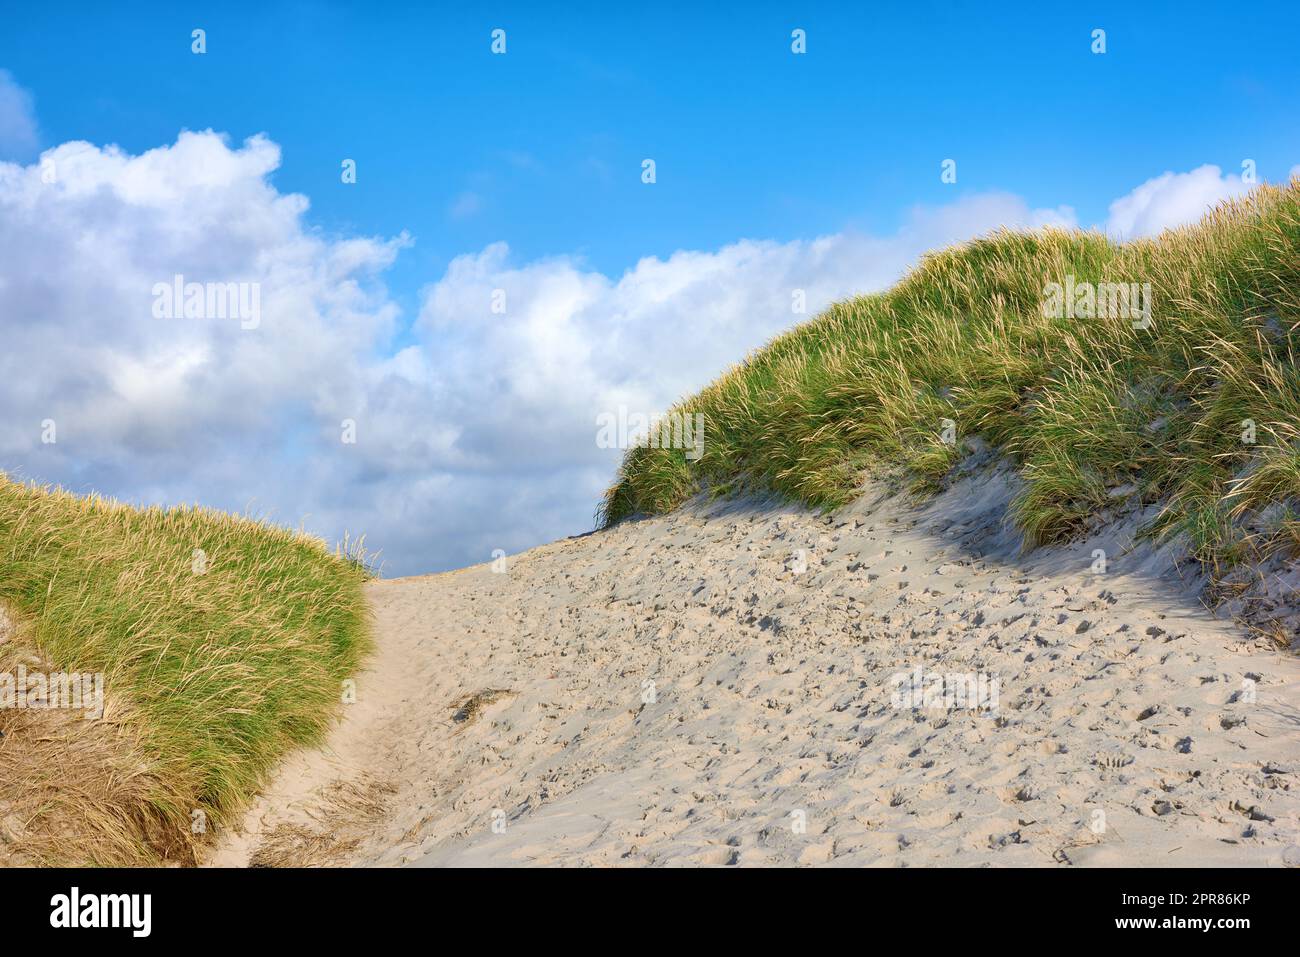 Closeup of a sand path with lush green grass growing on a beach with cloudy copy space. Beautiful blue sky on a warm and sunny summer day over a dry and sandy dune situated on a coastline bay area Stock Photo